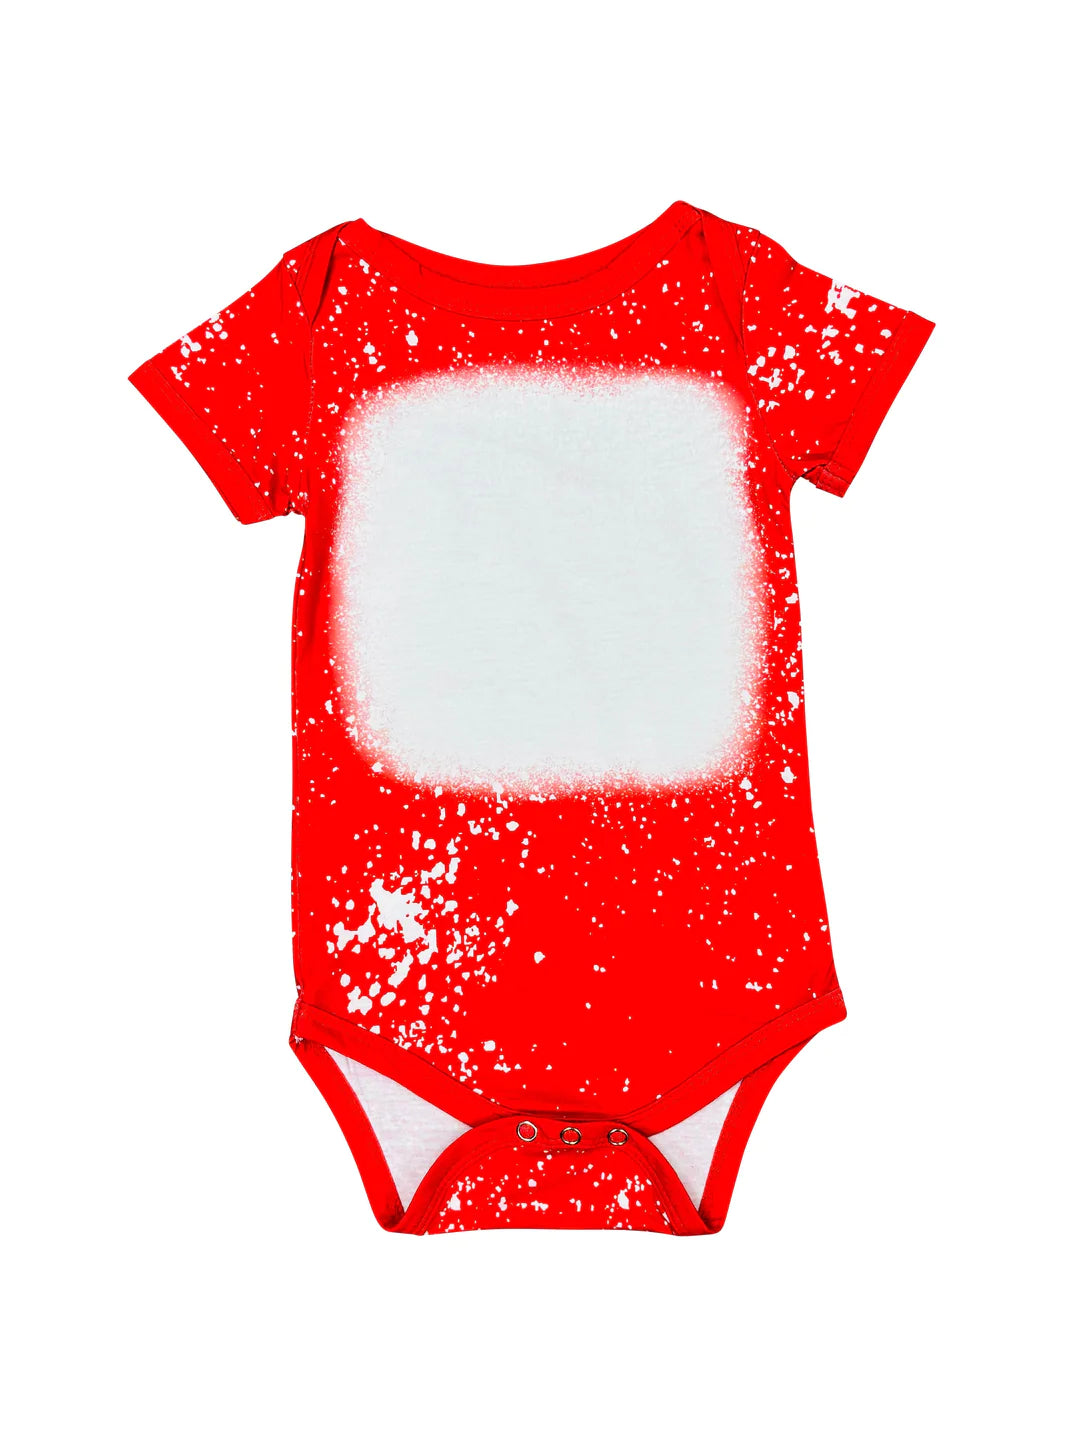 Faux Bleached Baby Onesie- Perfect for Sublimation!